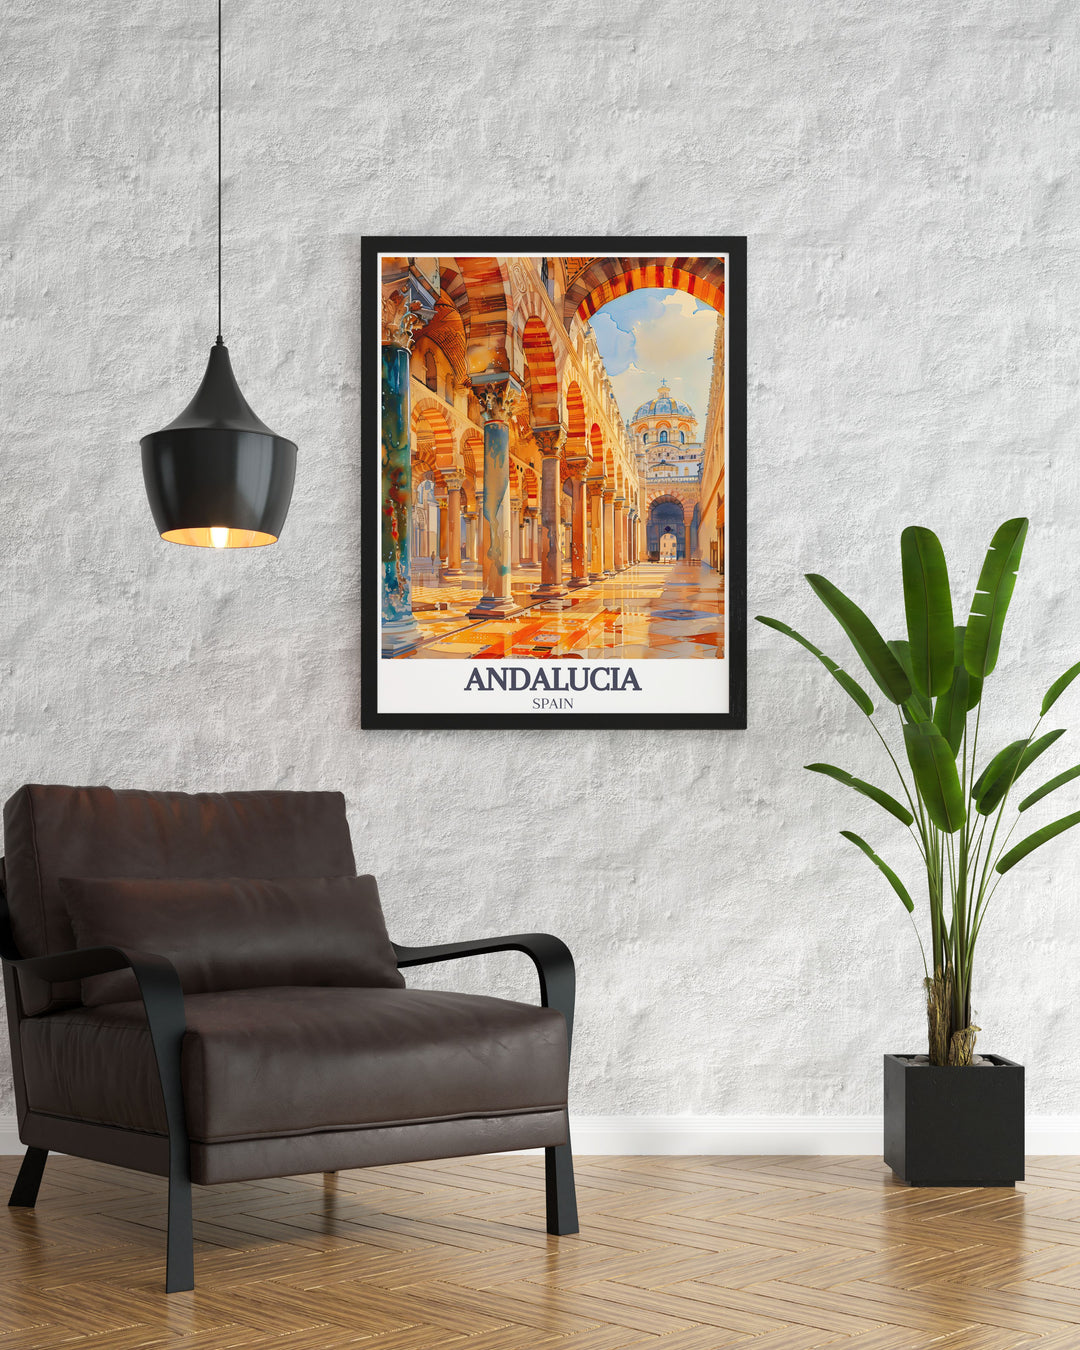 Featuring the Torre del Alminar bell tower in Cordoba, this art print highlights its architectural splendor and panoramic views, making it an ideal piece for history lovers and travel enthusiasts.